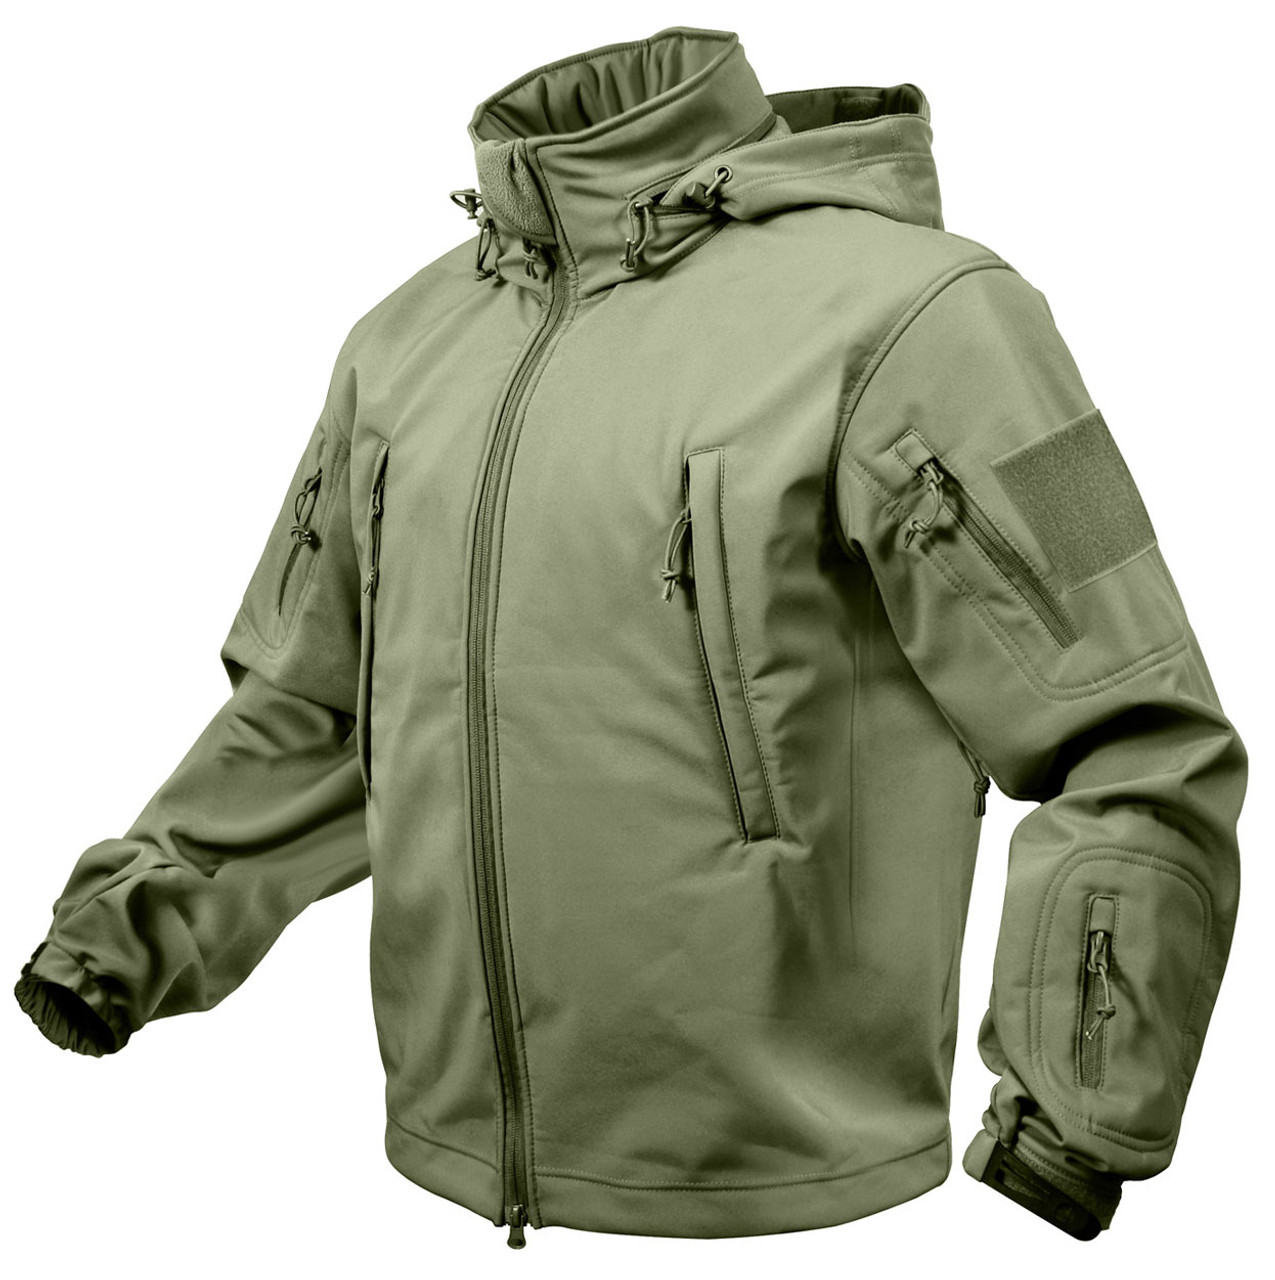 Shop Rothco Olive Drab Special Ops Tactical Soft Shell Jackets ...